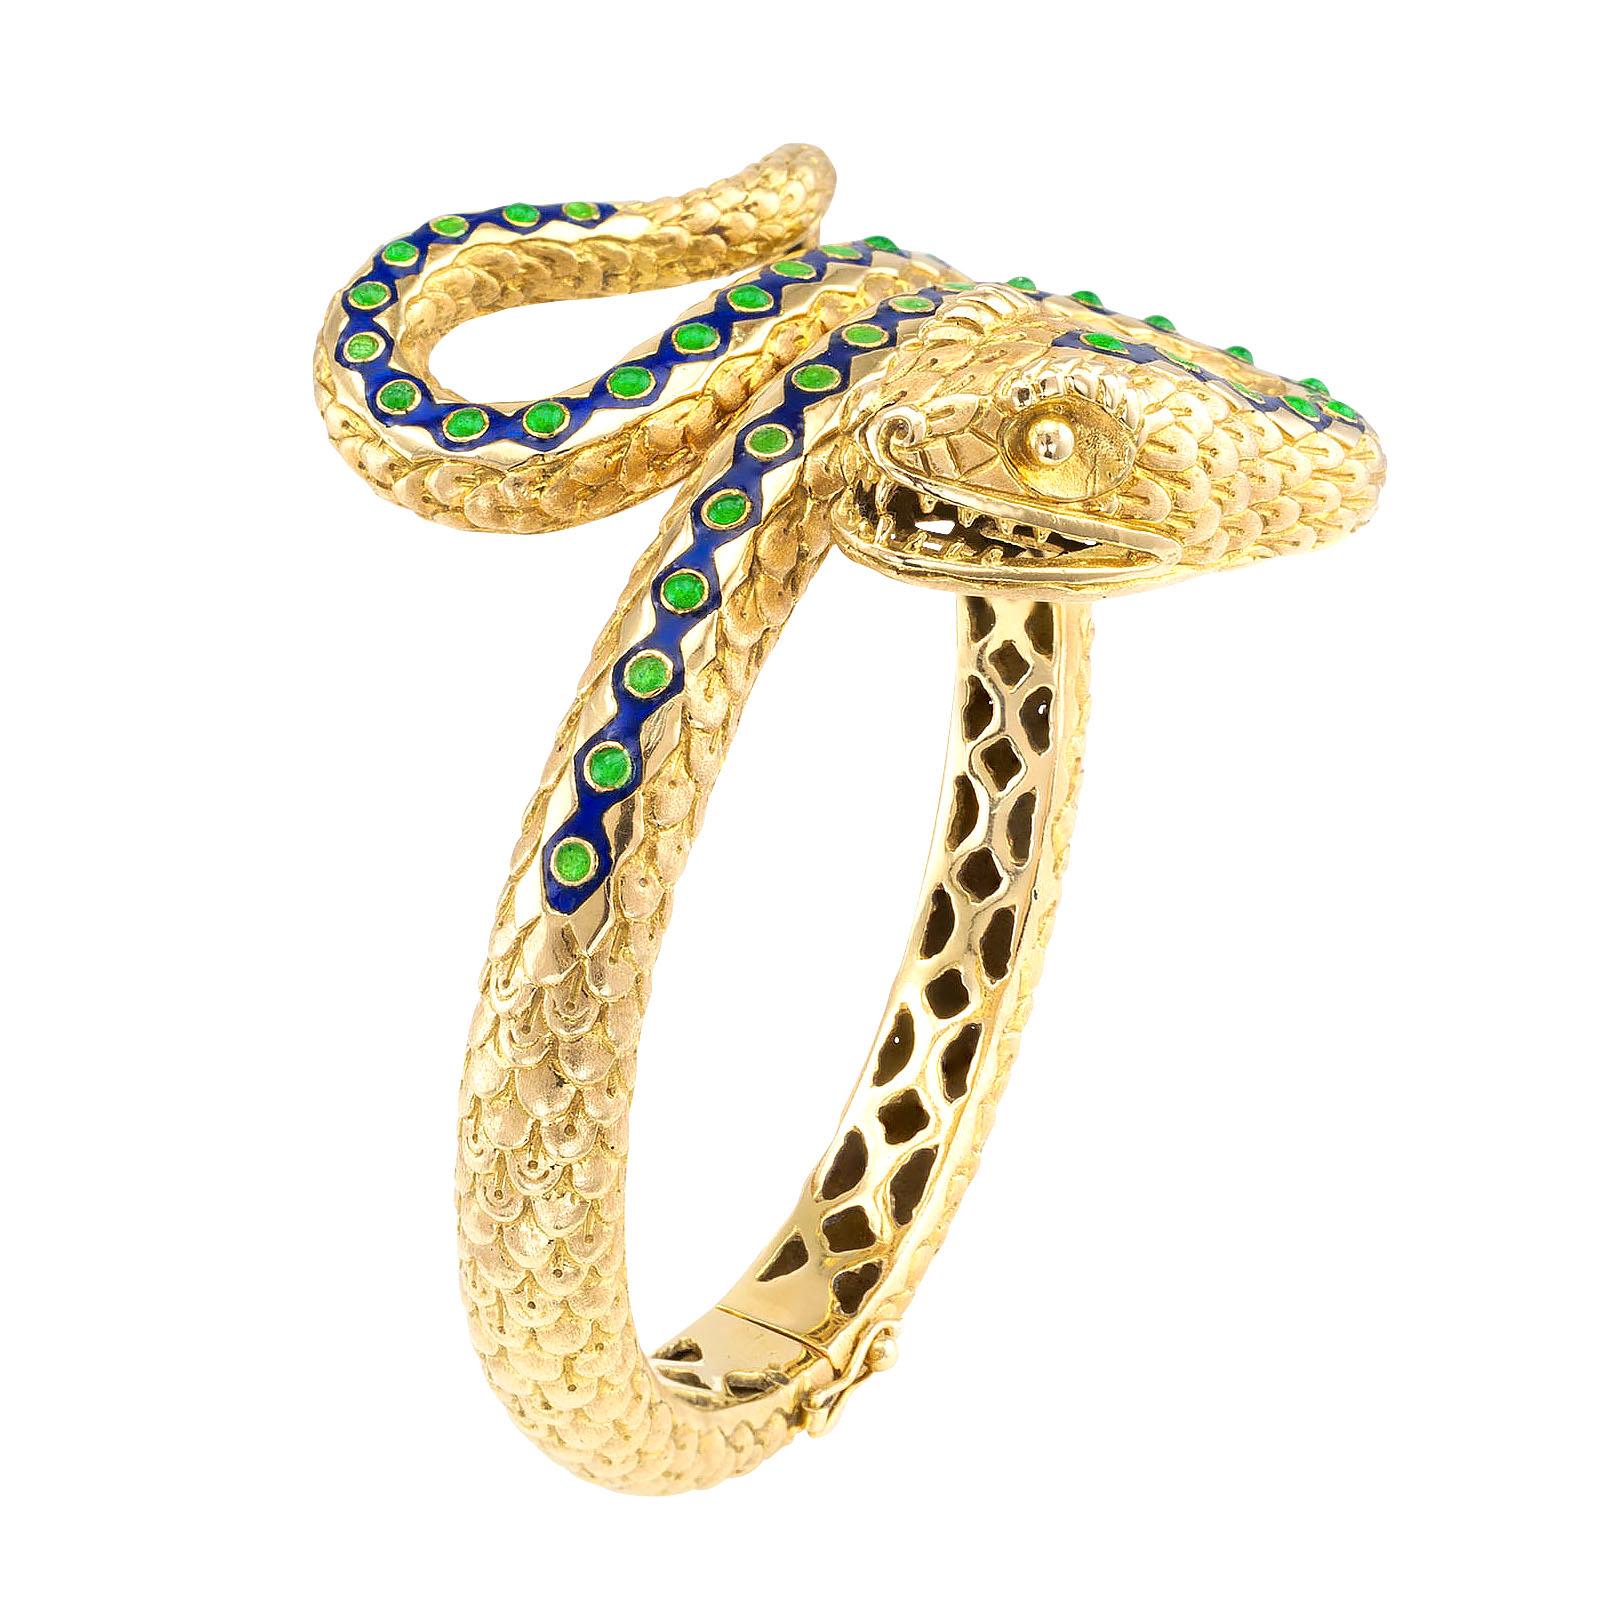 Blue and green enamel gold hinged snake bangle bracelet circa 1970.

DETAILS:
METAL: 18-karat yellow gold decorated with blue and green enamel accents accompanied by reptile scale motifs.

MEASUREMENTS: approximately 2” (5.0 cm) wide at the top and